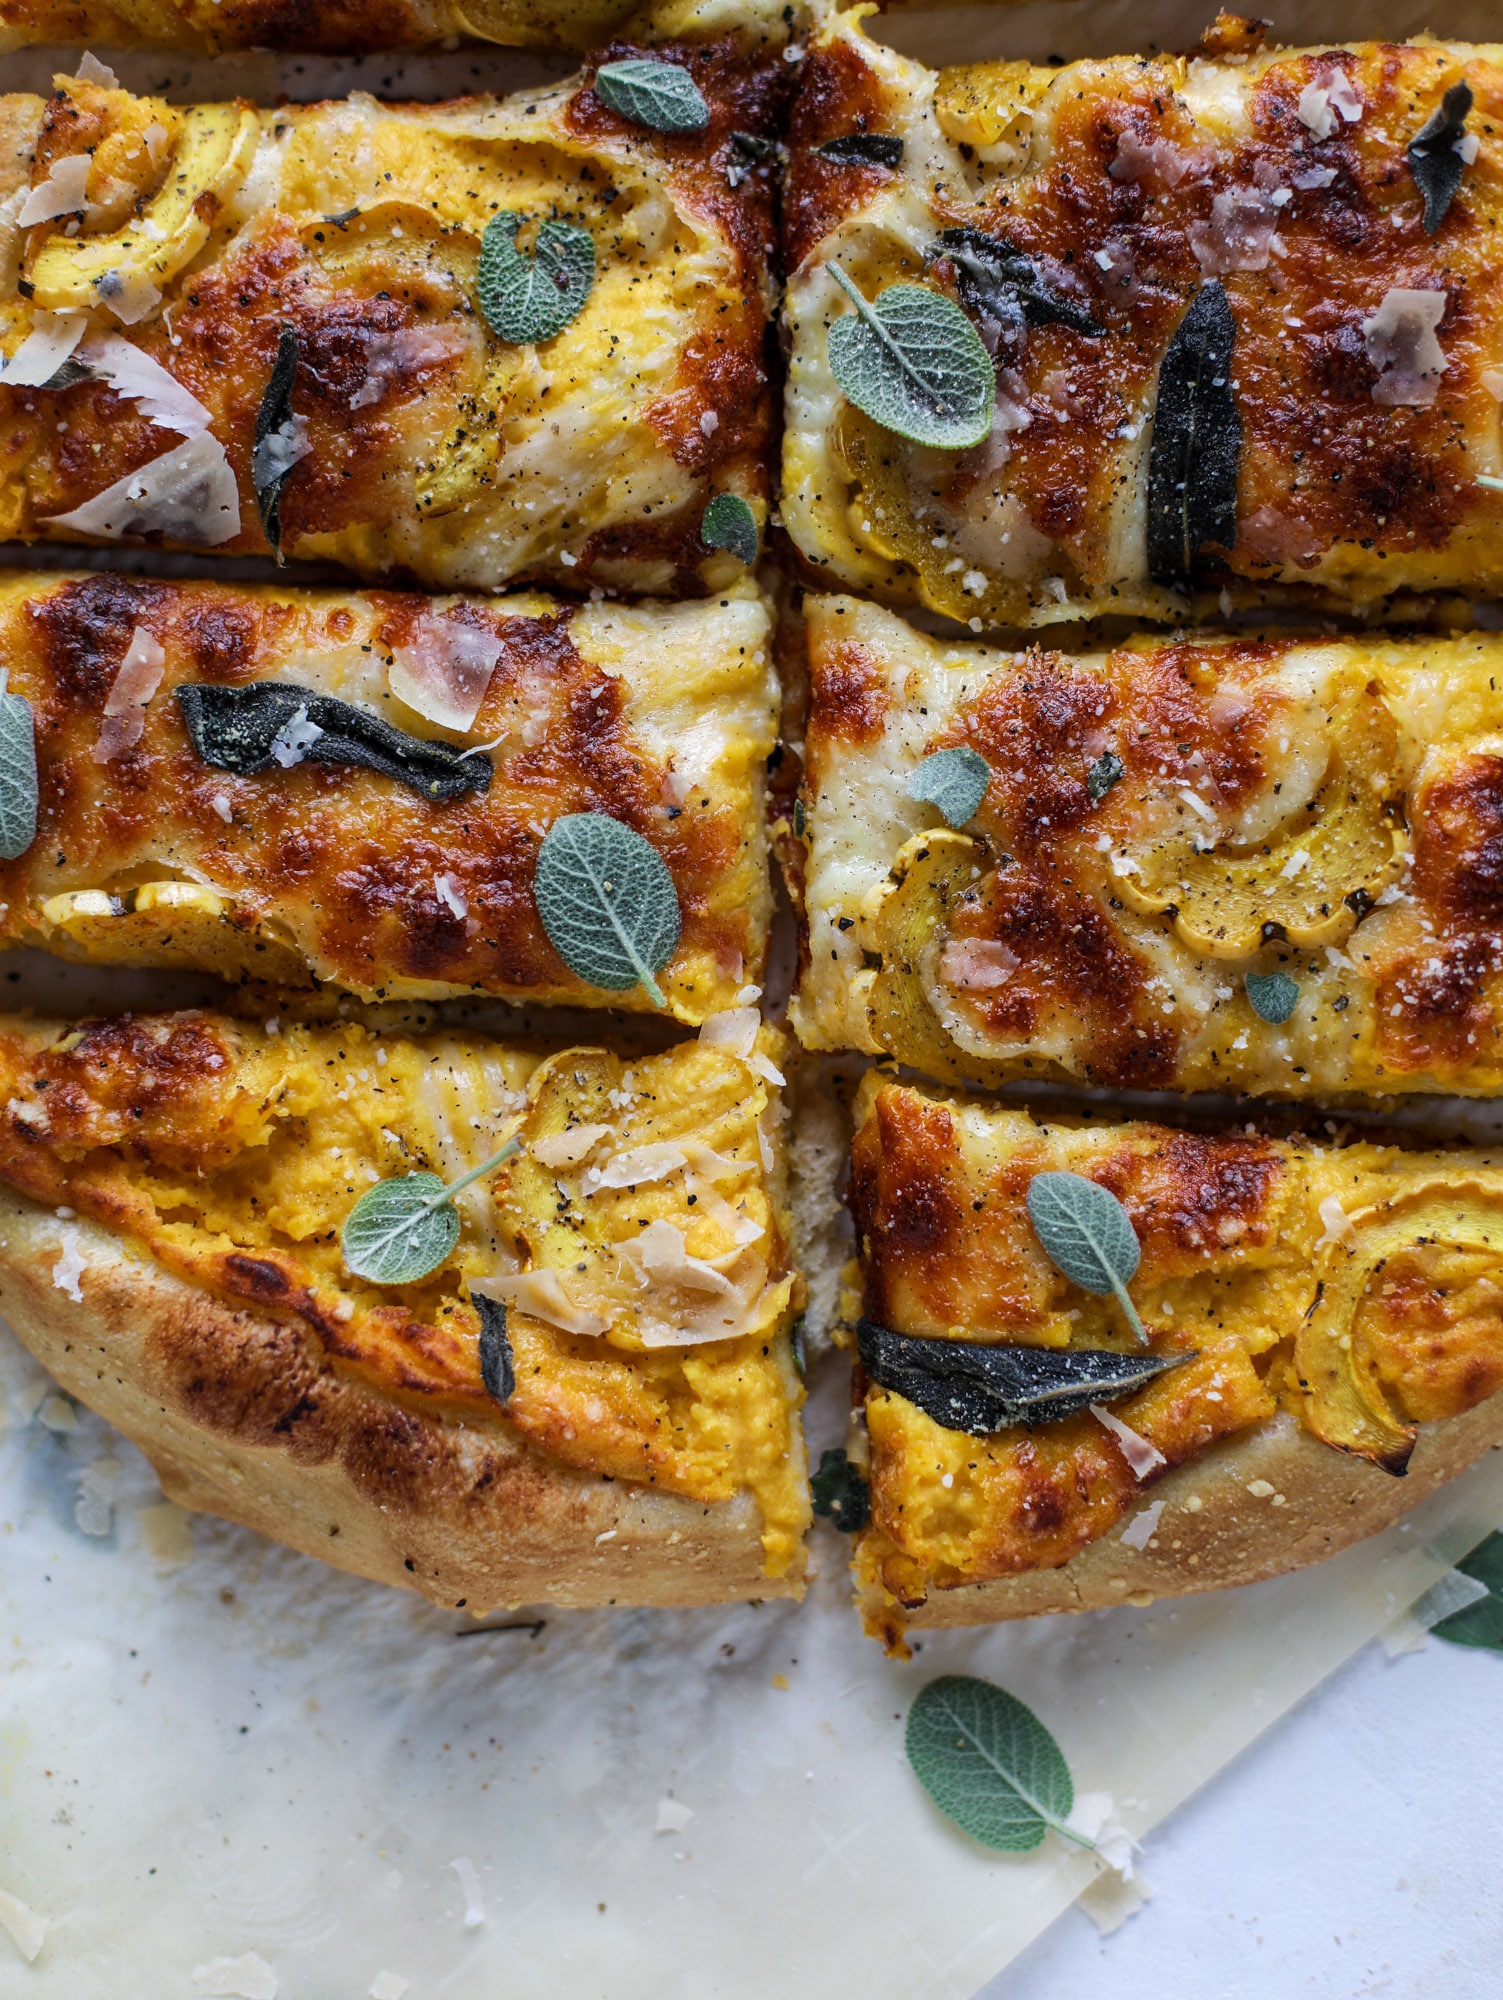 This butternut squash pizza has all the perfect tastes of fall in a pizza! Creamy butternut squash base, sharp parmesan cheese, crispy, fresh sage - it's all these and so super flavorful. It's easy too! I howsweeteats.com #butternutsquash #pizza